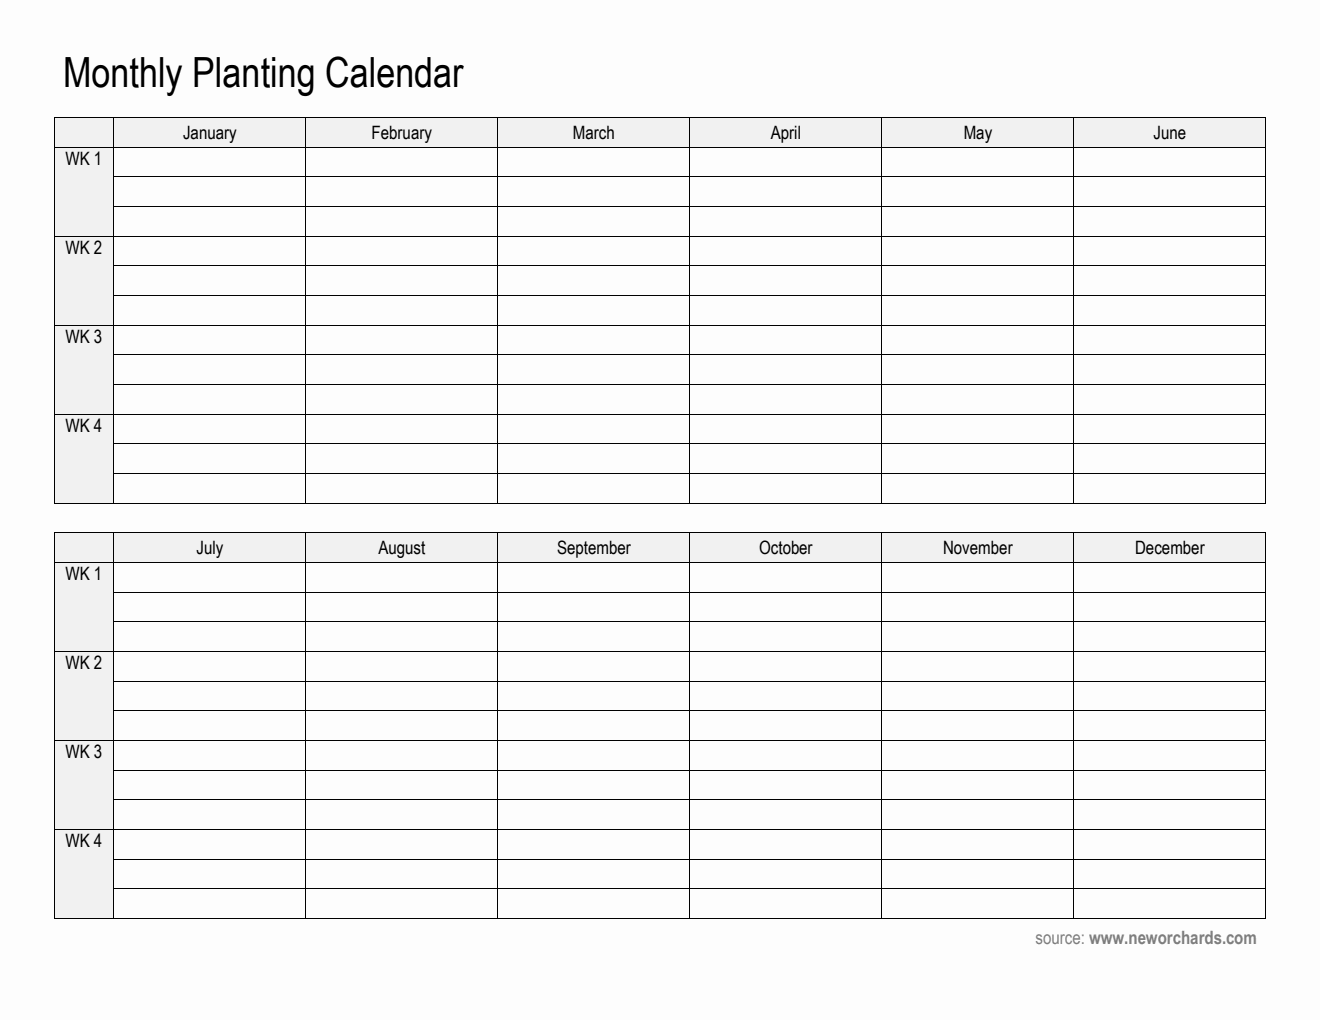  Monthly Planting Calendar in PDF